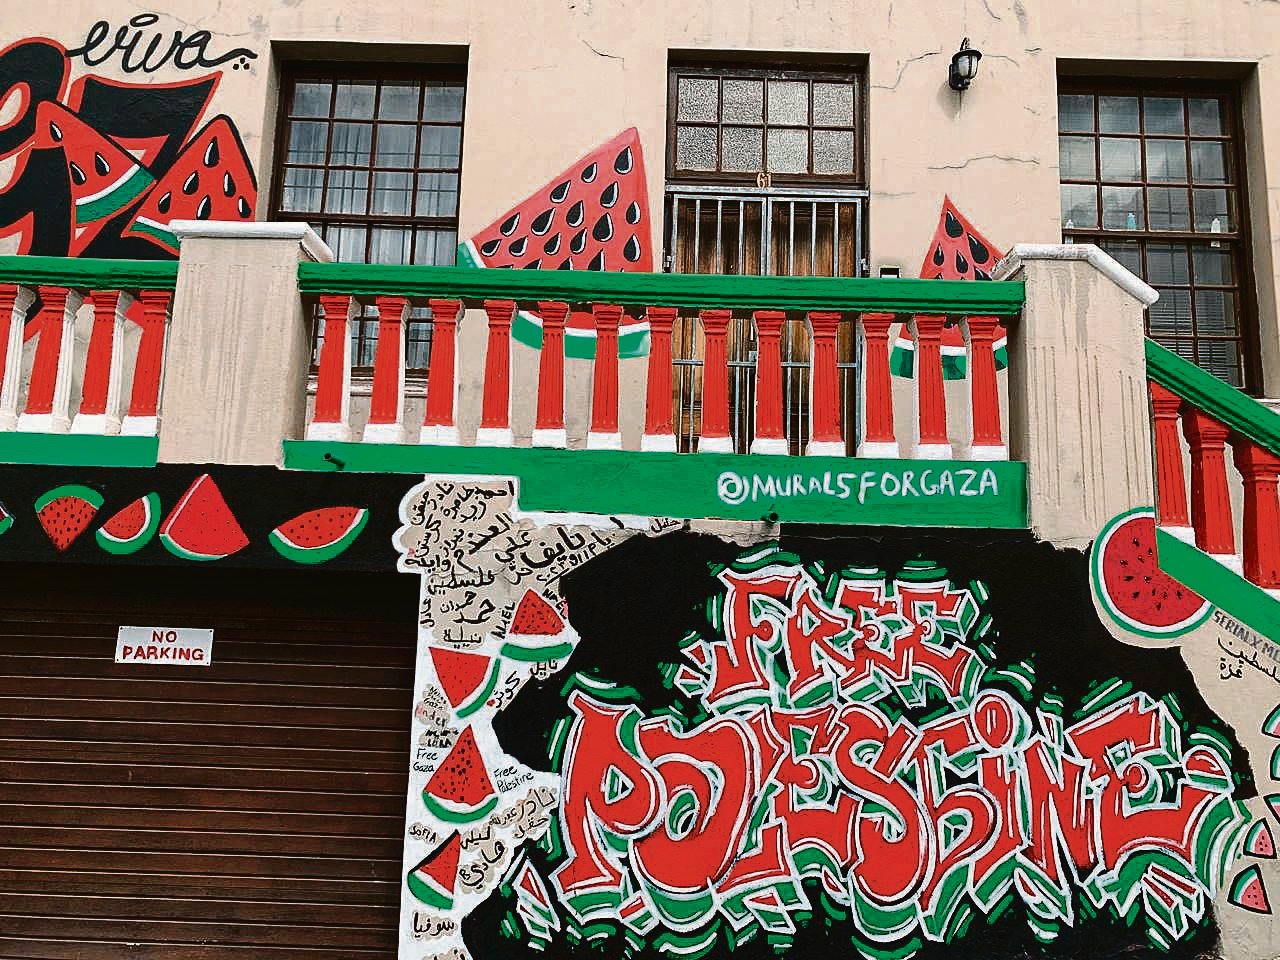 The project called Angel for Gaza has turned walls of homes in Bo-Kaap into a canvas with messages of support for Palestine.